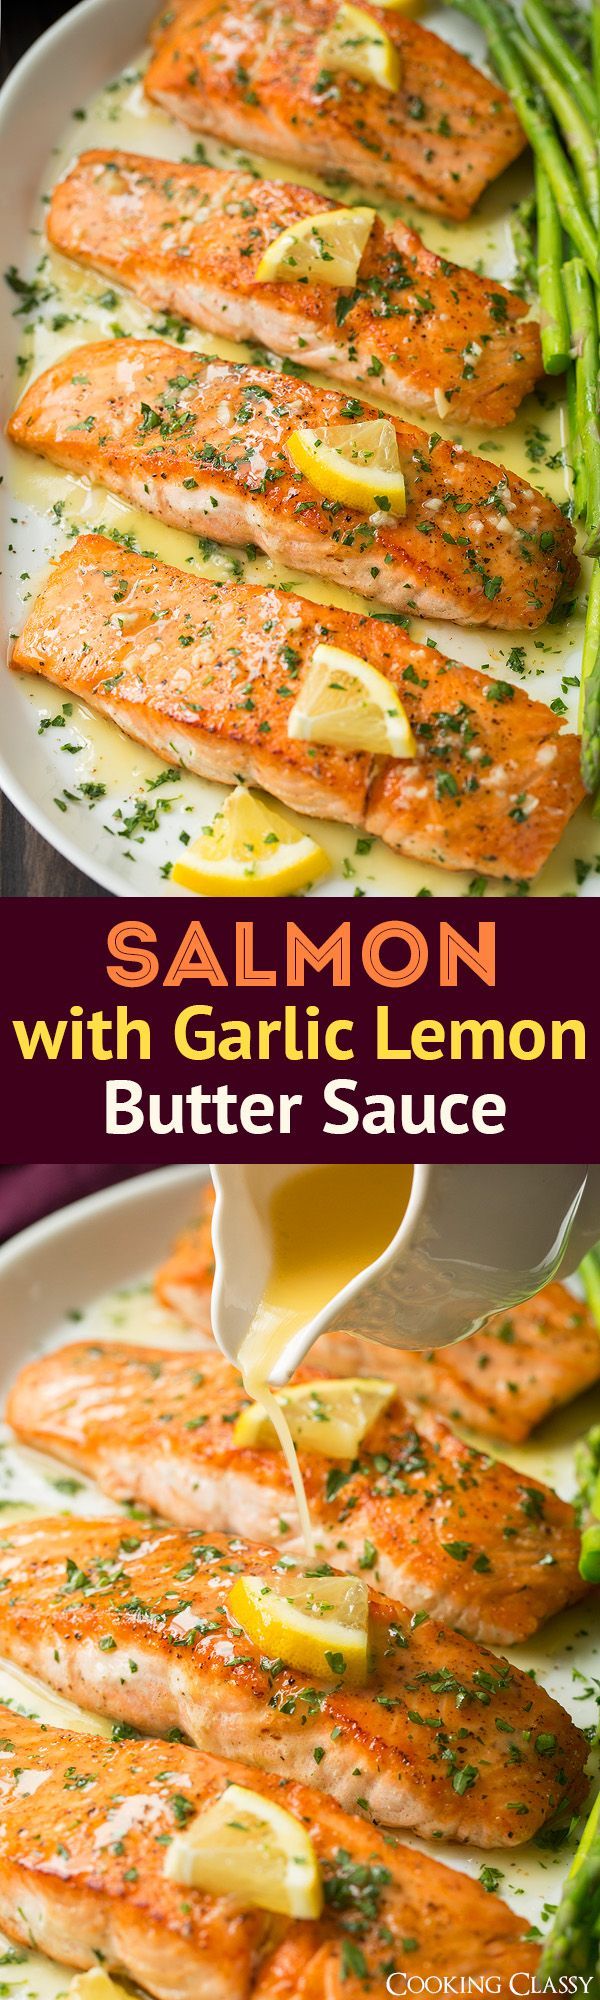 Skillet Seared Salmon with Garlic Lemon Butter Sauce – Cooking Classy